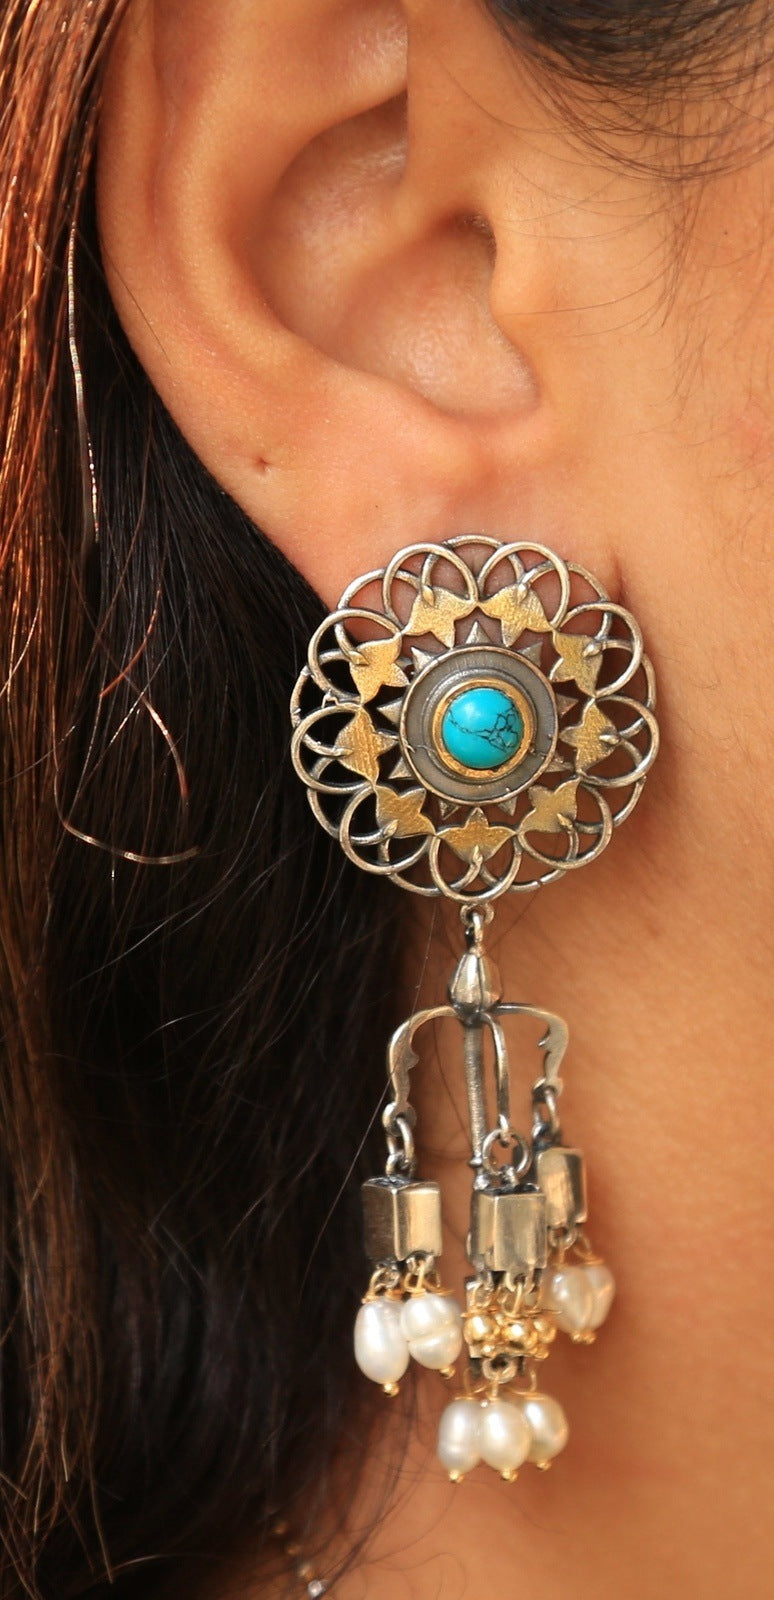 Alluring Mandala Dual tone Chandeliers - Close-up of the Mandala Dual Tone Chandeliers showcasing a dual-tone mandala design with turquoise kundan stones and rice pearl droplets. These earrings exude elegance and charm, adding a pop of vibrant color and sophistication to any ensemble.